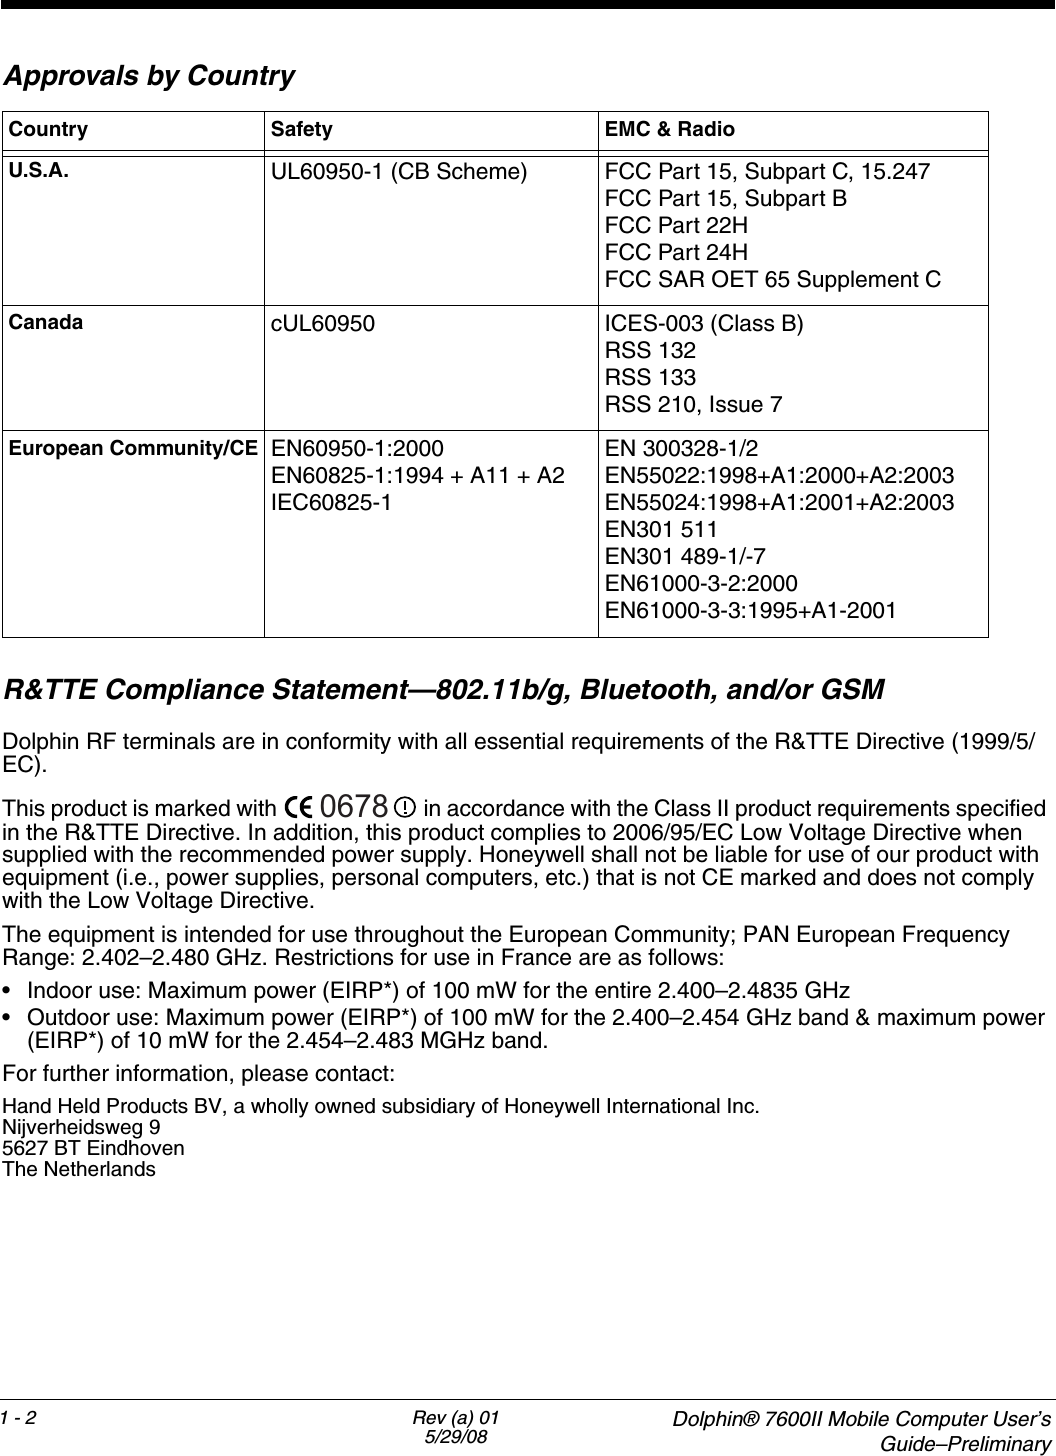 1 - 2 Rev (a) 015/29/08  Dolphin® 7600II Mobile Computer User’sGuide–PreliminaryApprovals by Country R&amp;TTE Compliance Statement—802.11b/g, Bluetooth, and/or GSMDolphin RF terminals are in conformity with all essential requirements of the R&amp;TTE Directive (1999/5/EC). This product is marked with   in accordance with the Class II product requirements specified in the R&amp;TTE Directive. In addition, this product complies to 2006/95/EC Low Voltage Directive when supplied with the recommended power supply. Honeywell shall not be liable for use of our product with equipment (i.e., power supplies, personal computers, etc.) that is not CE marked and does not comply with the Low Voltage Directive.The equipment is intended for use throughout the European Community; PAN European Frequency Range: 2.402–2.480 GHz. Restrictions for use in France are as follows: • Indoor use: Maximum power (EIRP*) of 100 mW for the entire 2.400–2.4835 GHz • Outdoor use: Maximum power (EIRP*) of 100 mW for the 2.400–2.454 GHz band &amp; maximum power (EIRP*) of 10 mW for the 2.454–2.483 MGHz band.For further information, please contact:Hand Held Products BV, a wholly owned subsidiary of Honeywell International Inc.Nijverheidsweg 95627 BT EindhovenThe NetherlandsCountry Safety EMC &amp; RadioU.S.A. UL60950-1 (CB Scheme) FCC Part 15, Subpart C, 15.247FCC Part 15, Subpart BFCC Part 22HFCC Part 24HFCC SAR OET 65 Supplement CCanada cUL60950 ICES-003 (Class B)RSS 132RSS 133RSS 210, Issue 7European Community/CE EN60950-1:2000EN60825-1:1994 + A11 + A2IEC60825-1EN 300328-1/2EN55022:1998+A1:2000+A2:2003EN55024:1998+A1:2001+A2:2003EN301 511EN301 489-1/-7EN61000-3-2:2000EN61000-3-3:1995+A1-20010678